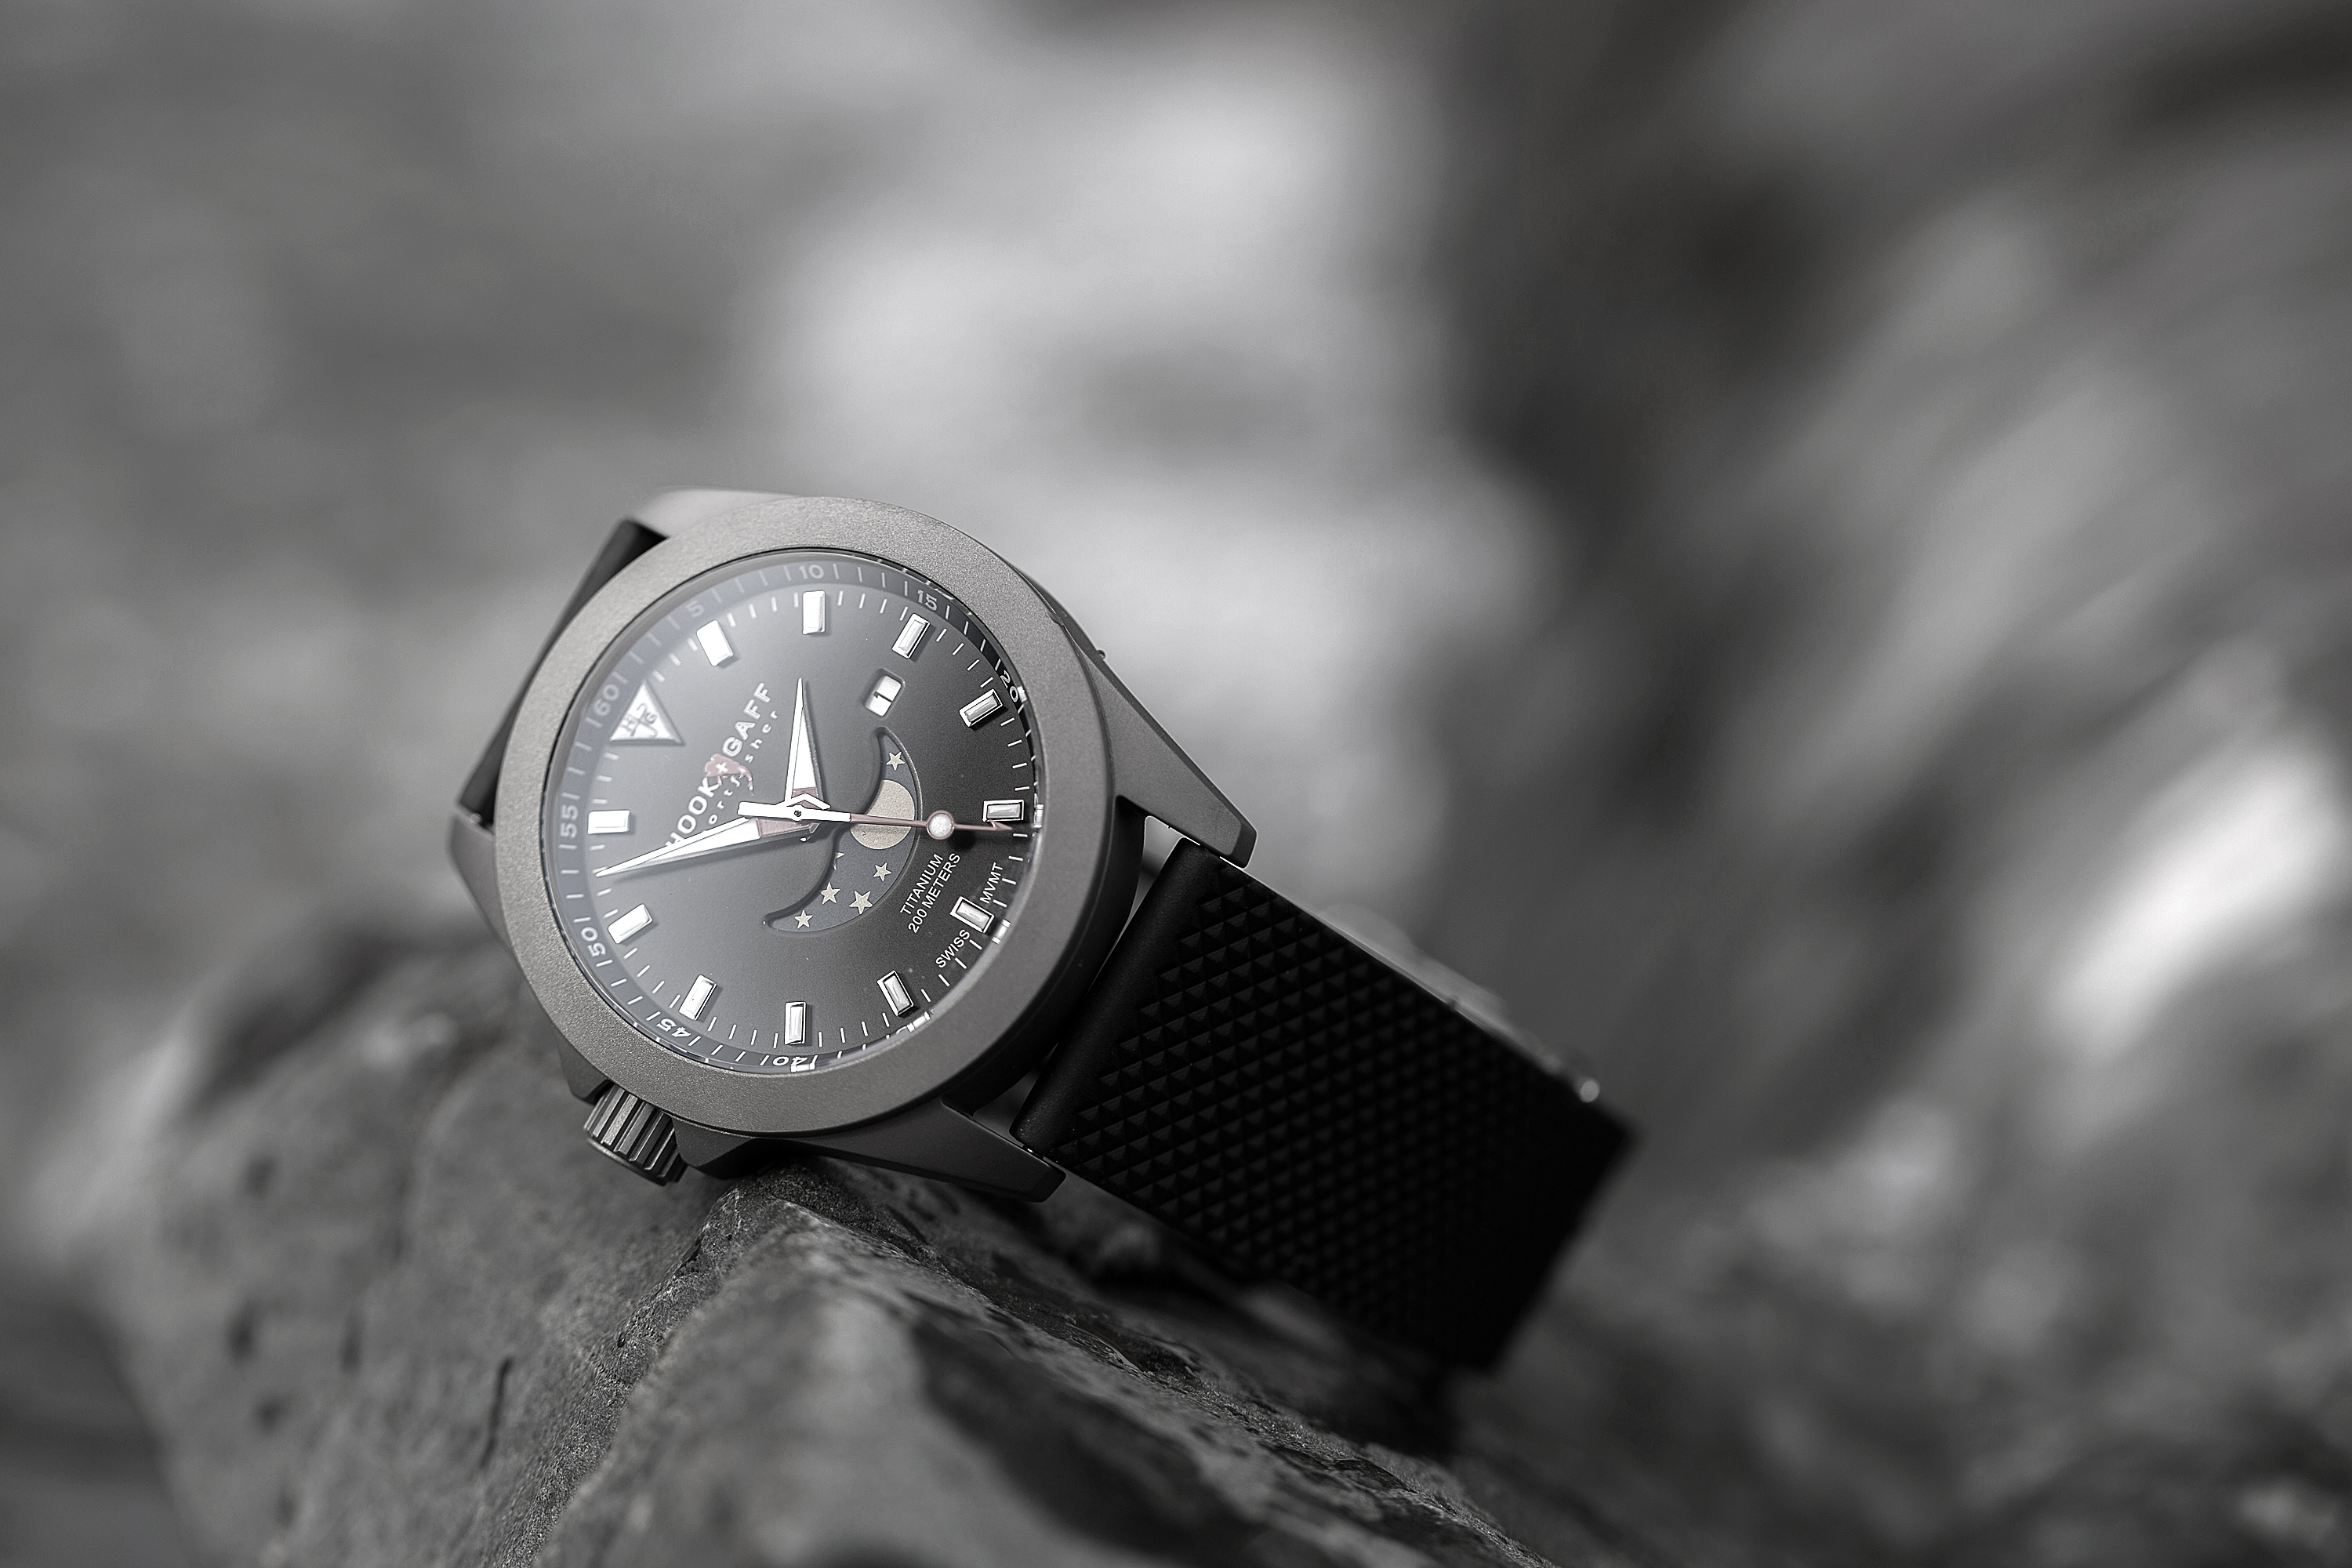 Hook + Gaff's Sportfisher II Moonphase Watch is Rugged and